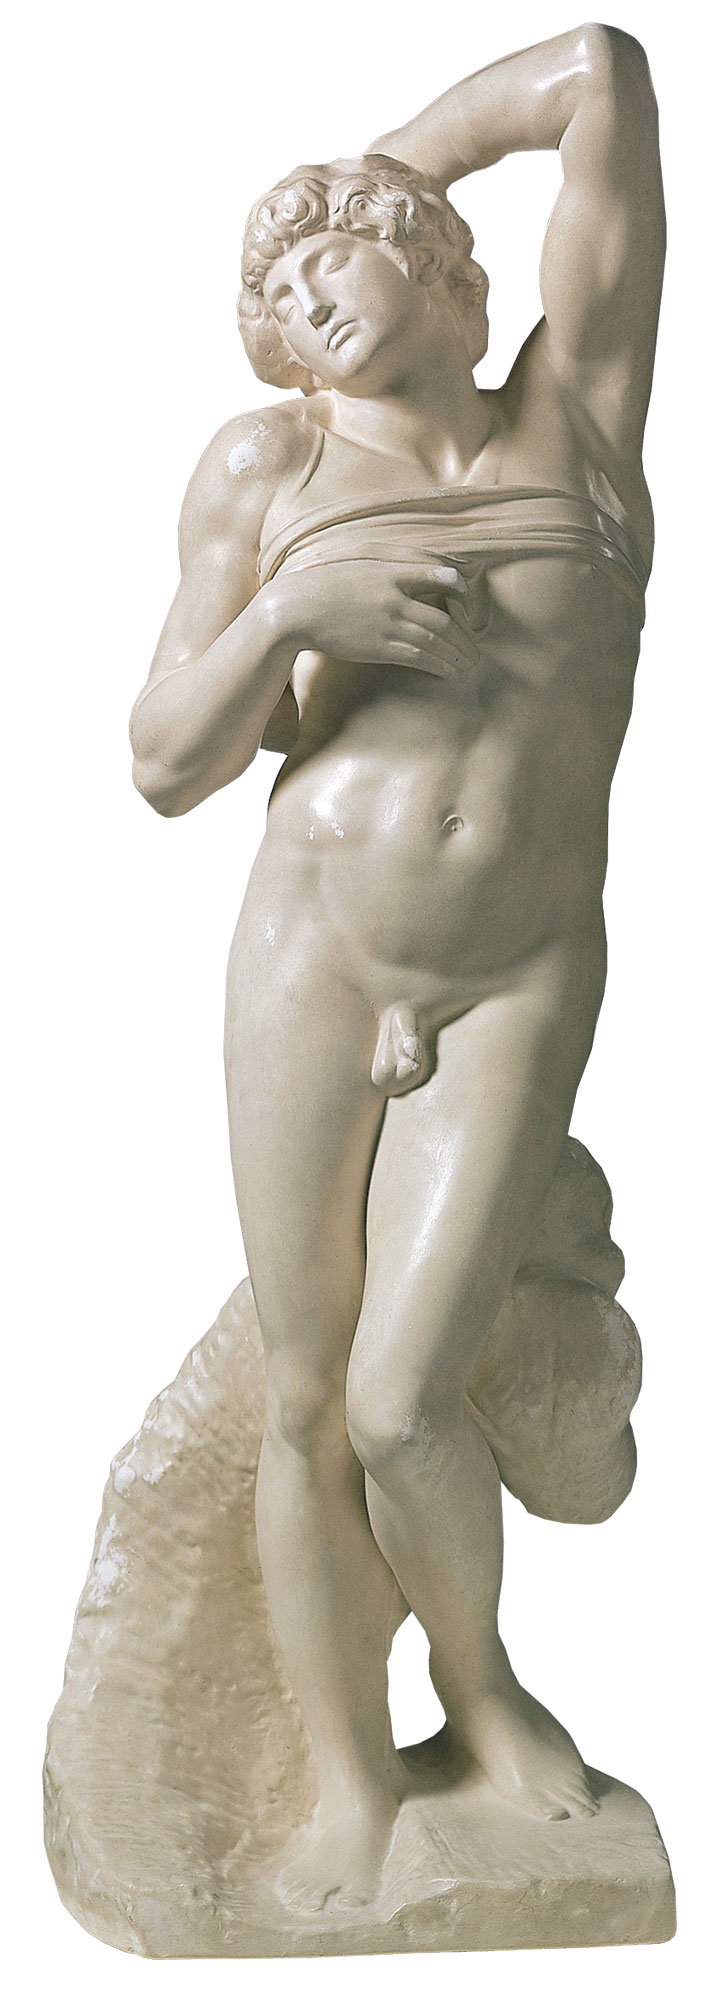 Sculpture "Dying Slave" (1513), reduction in artificial marble by Michelangelo Buonarroti